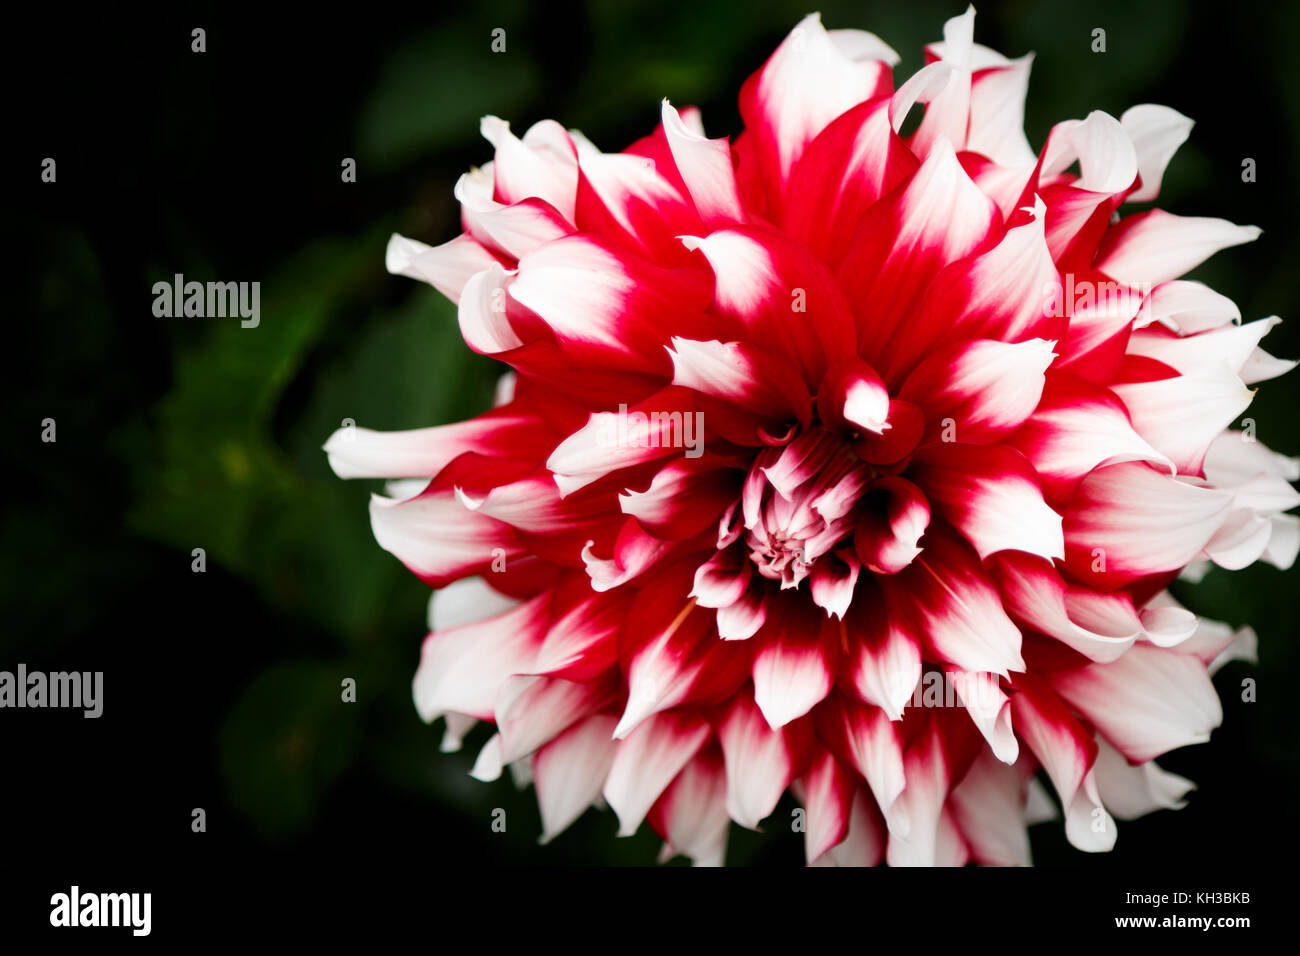 Single red and white dahlia flower blossom with green background Stock Photo